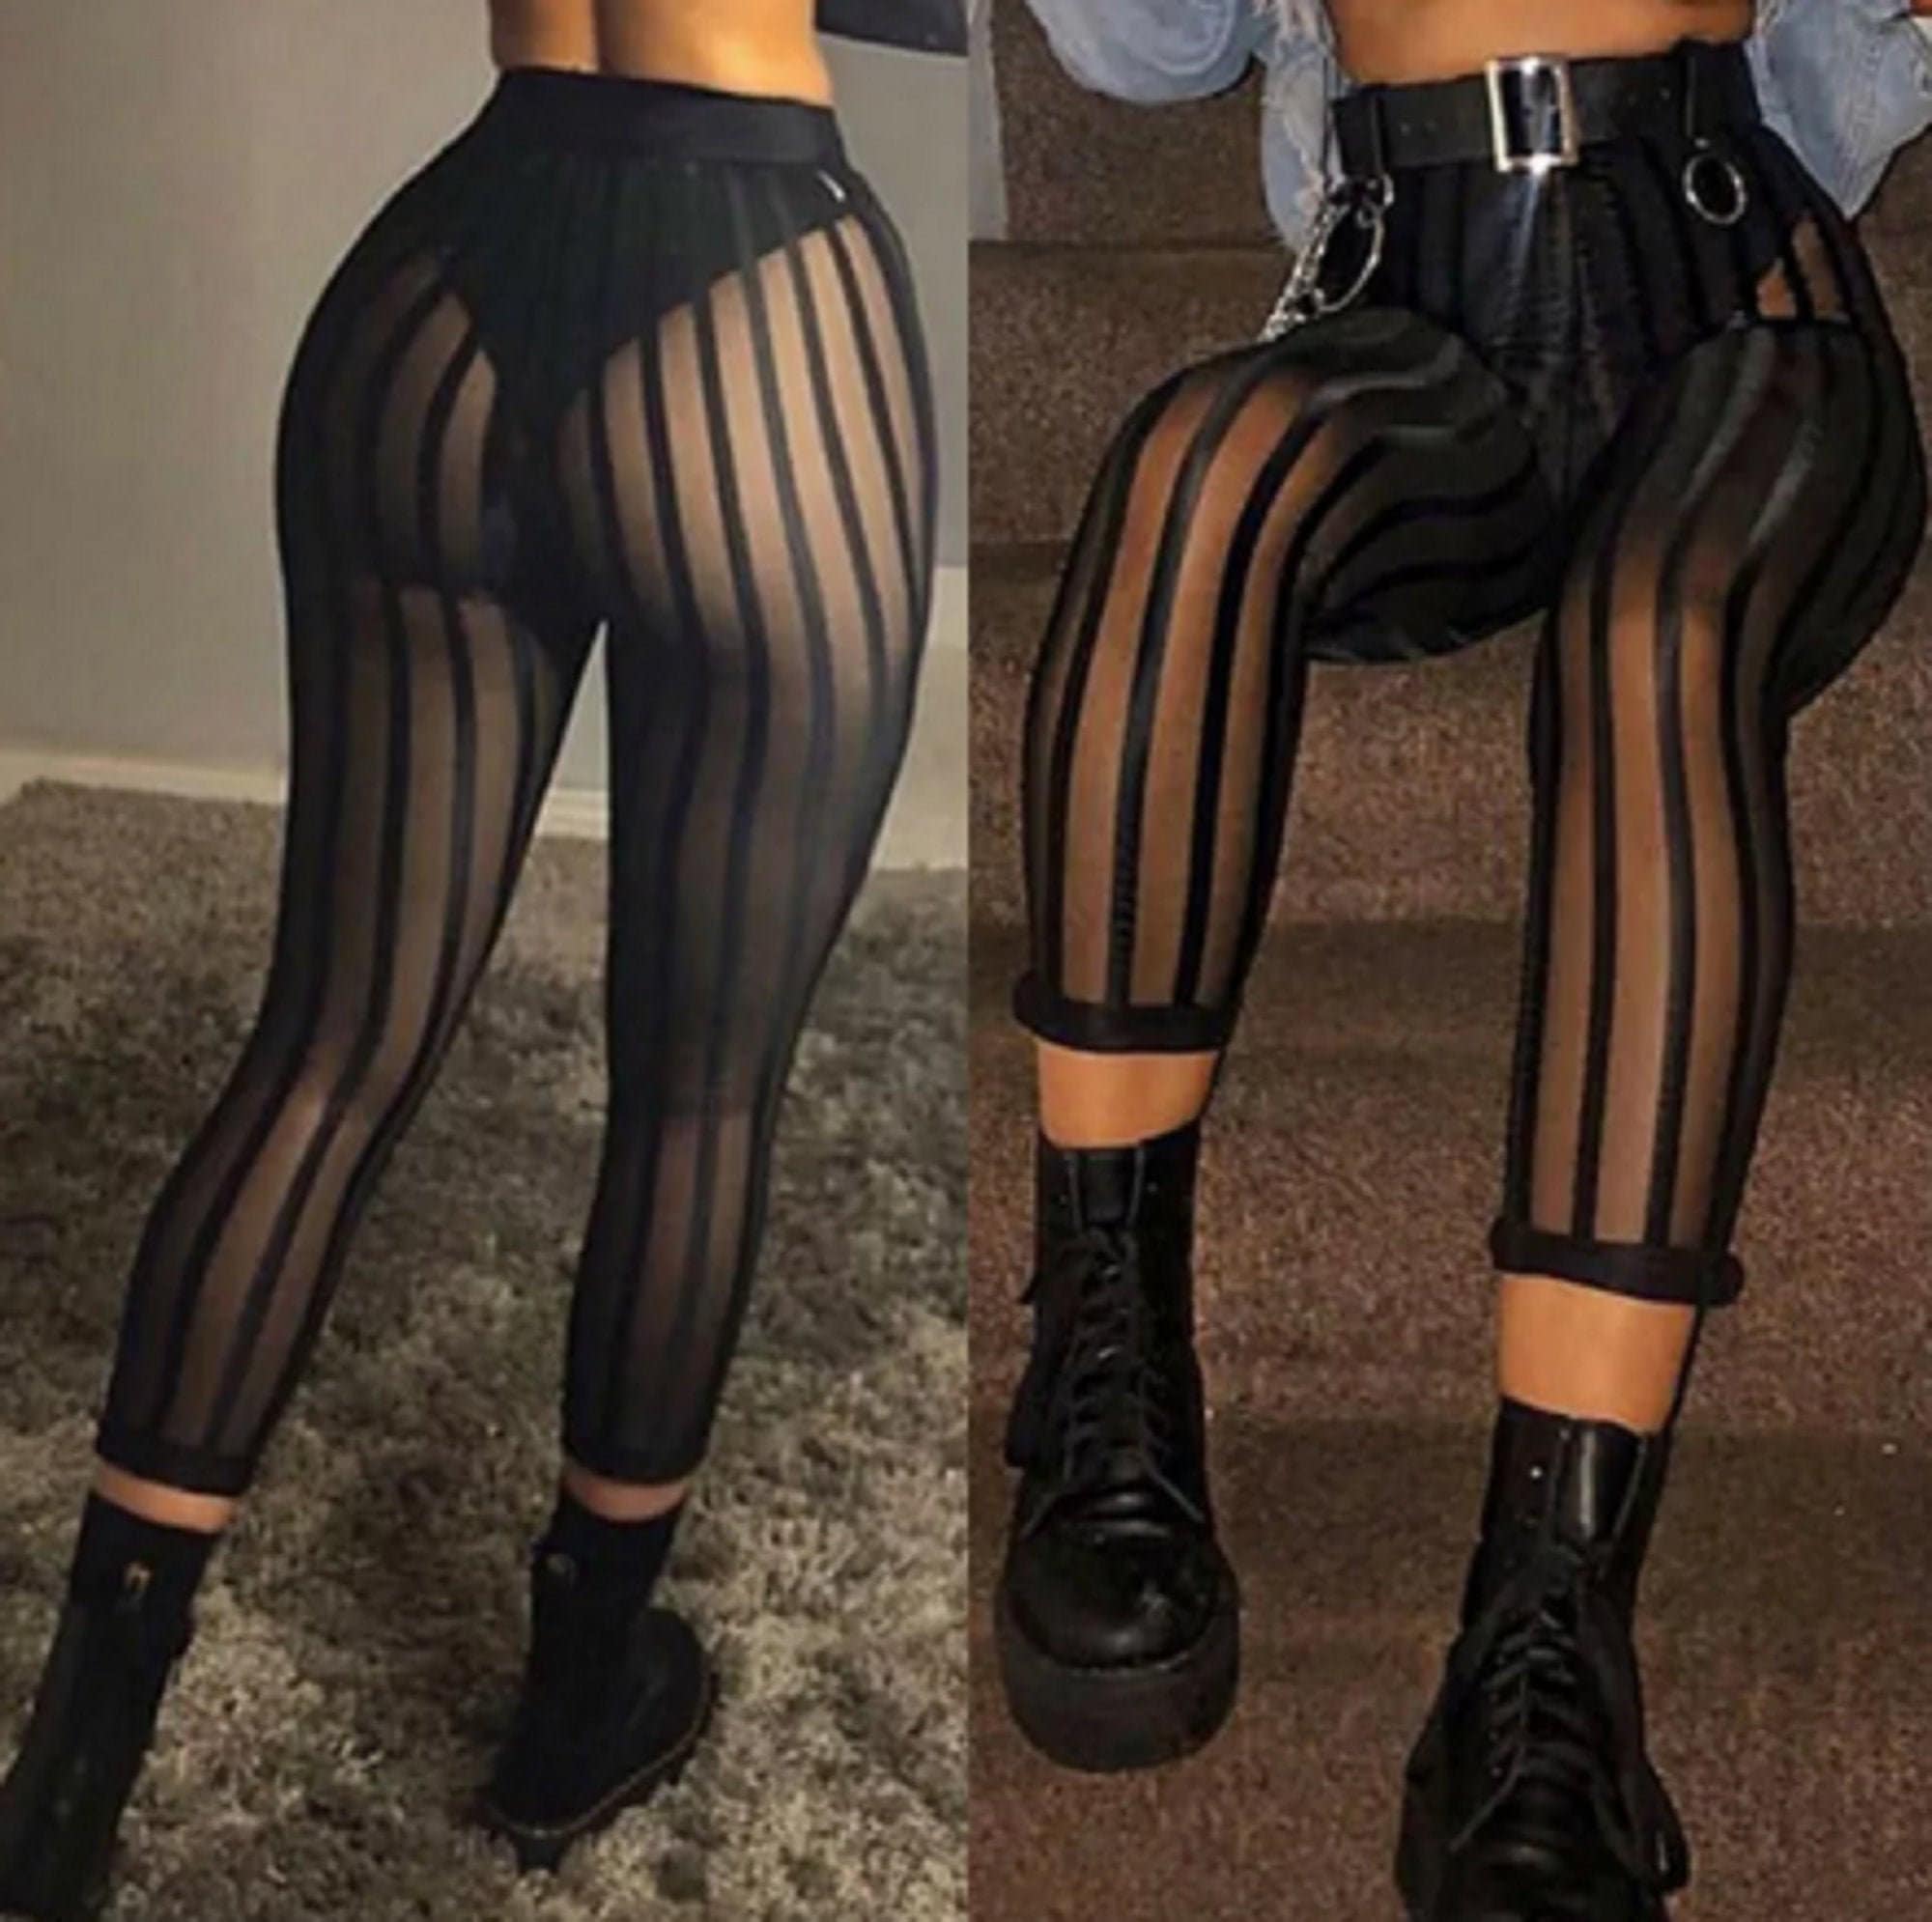 alison velarde recommends most see through leggings pic